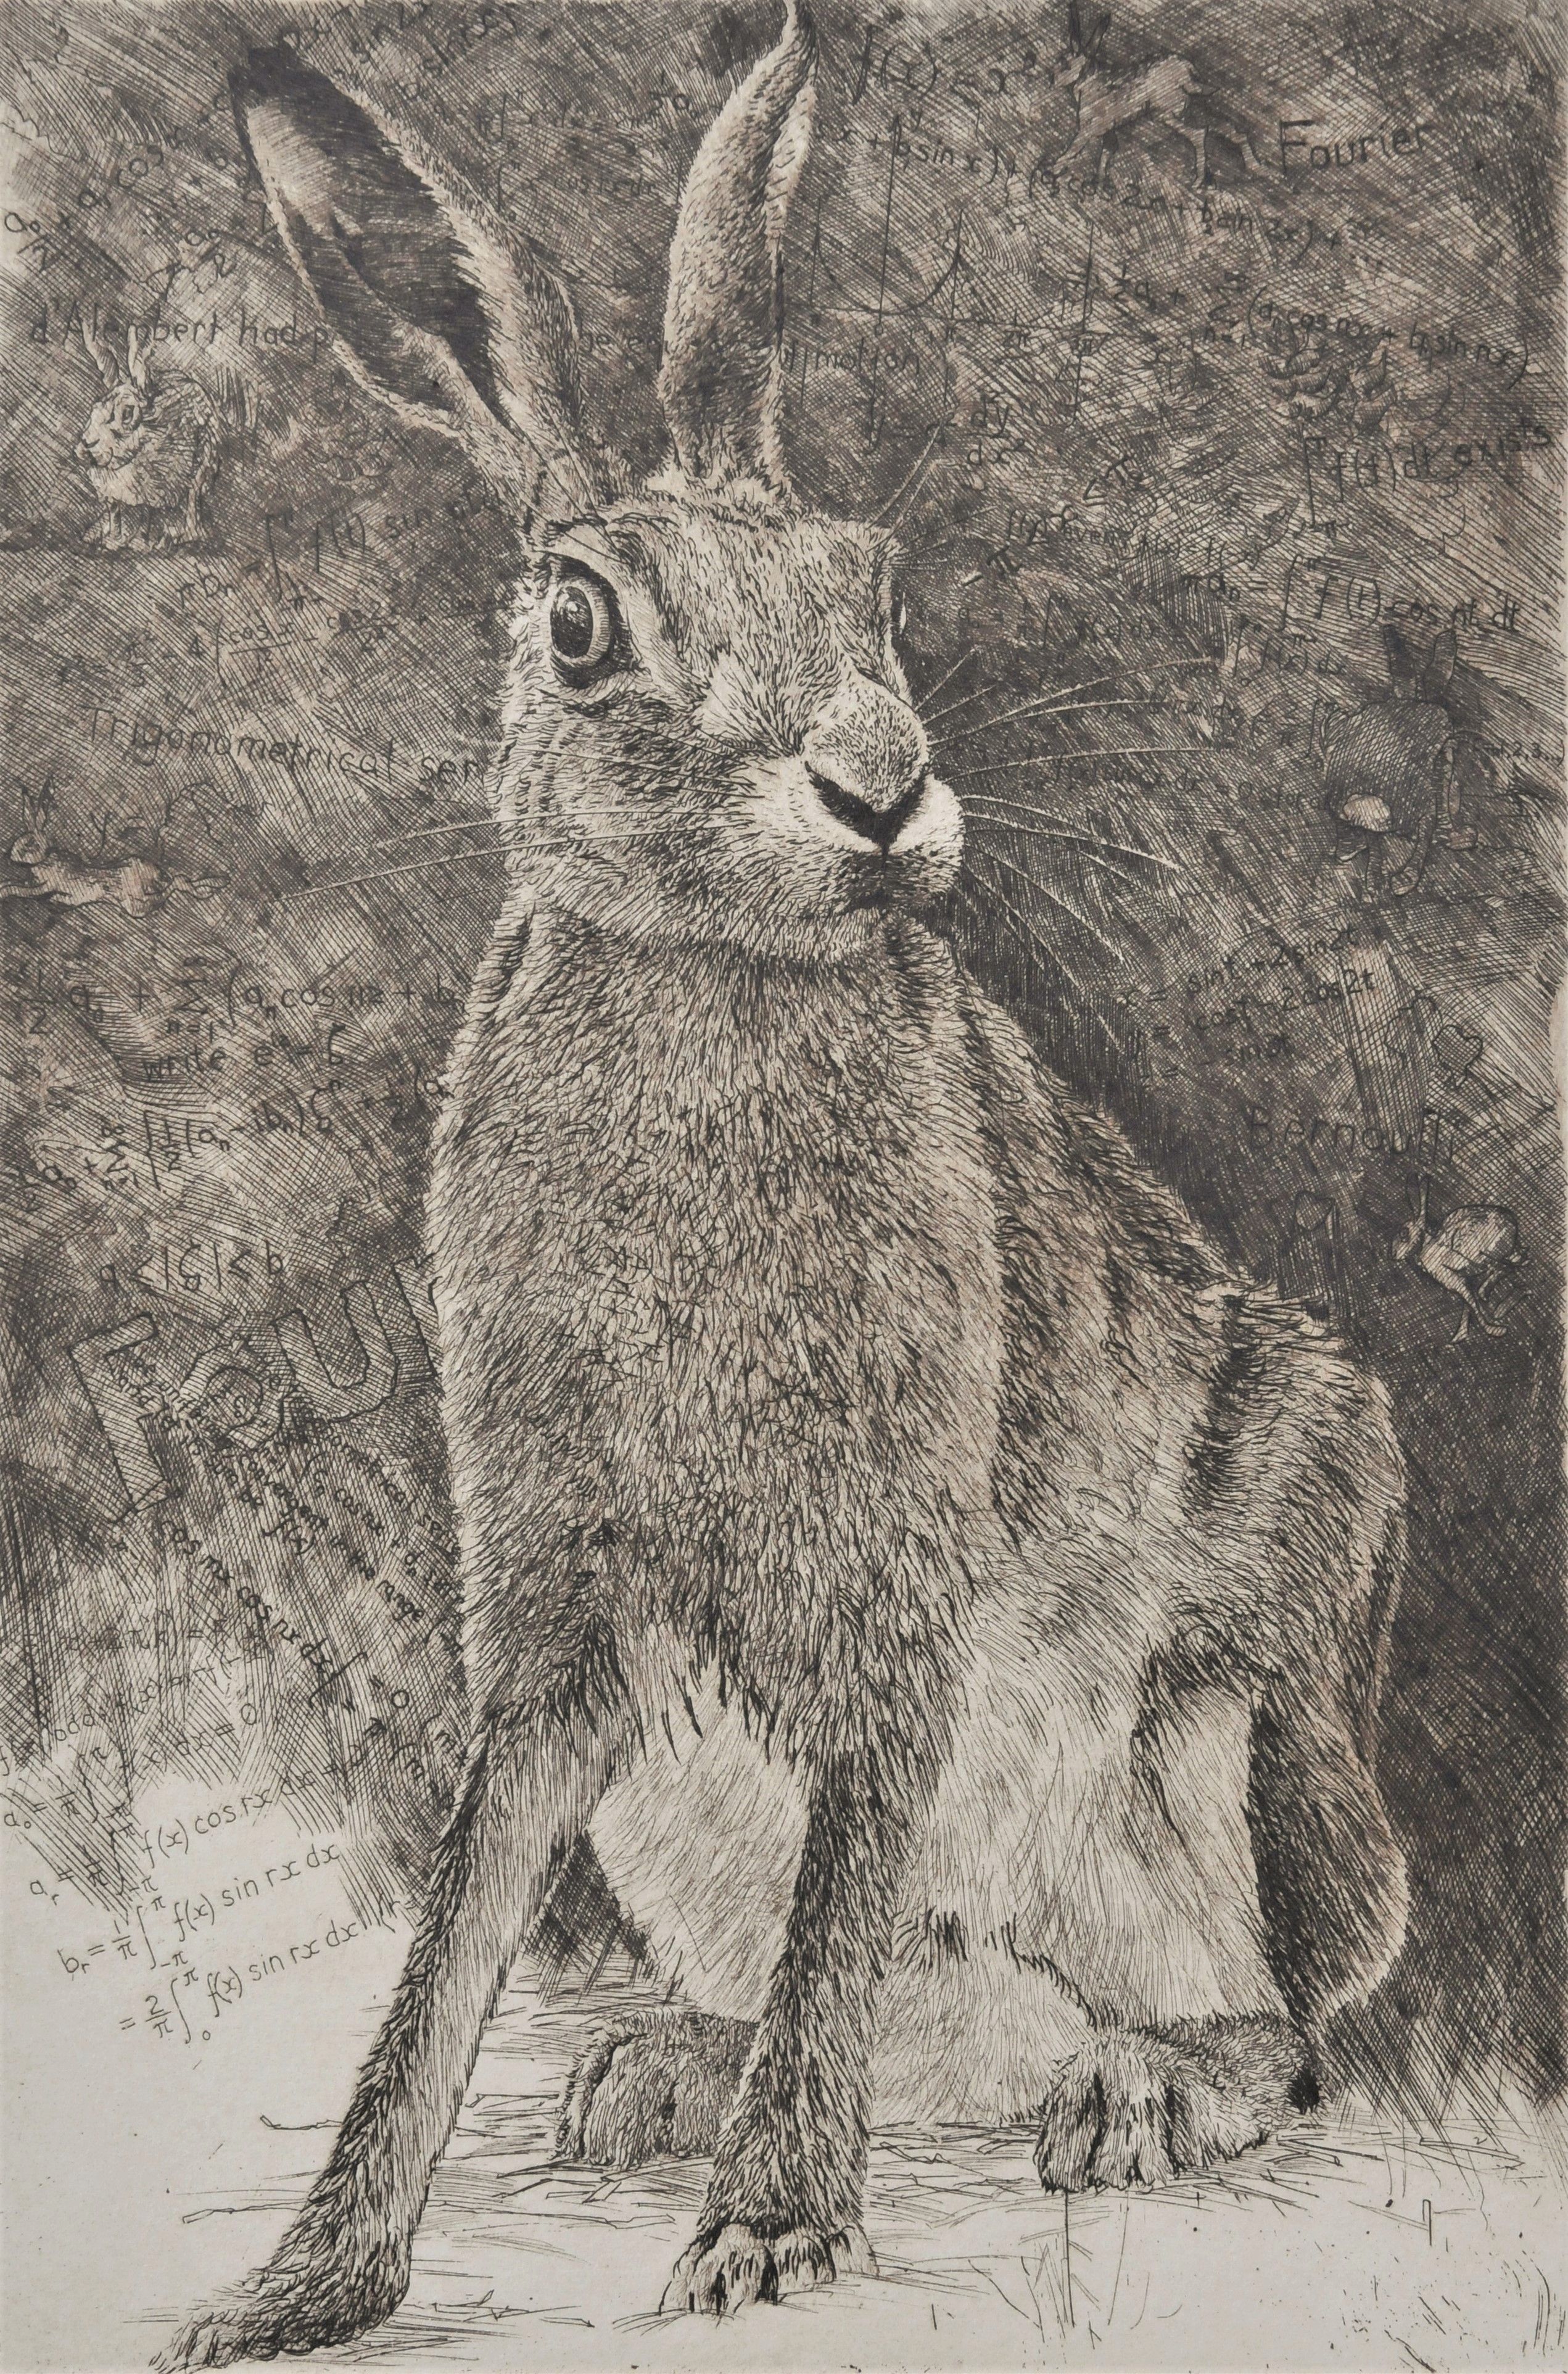 Fourier's Hare by Will Taylor